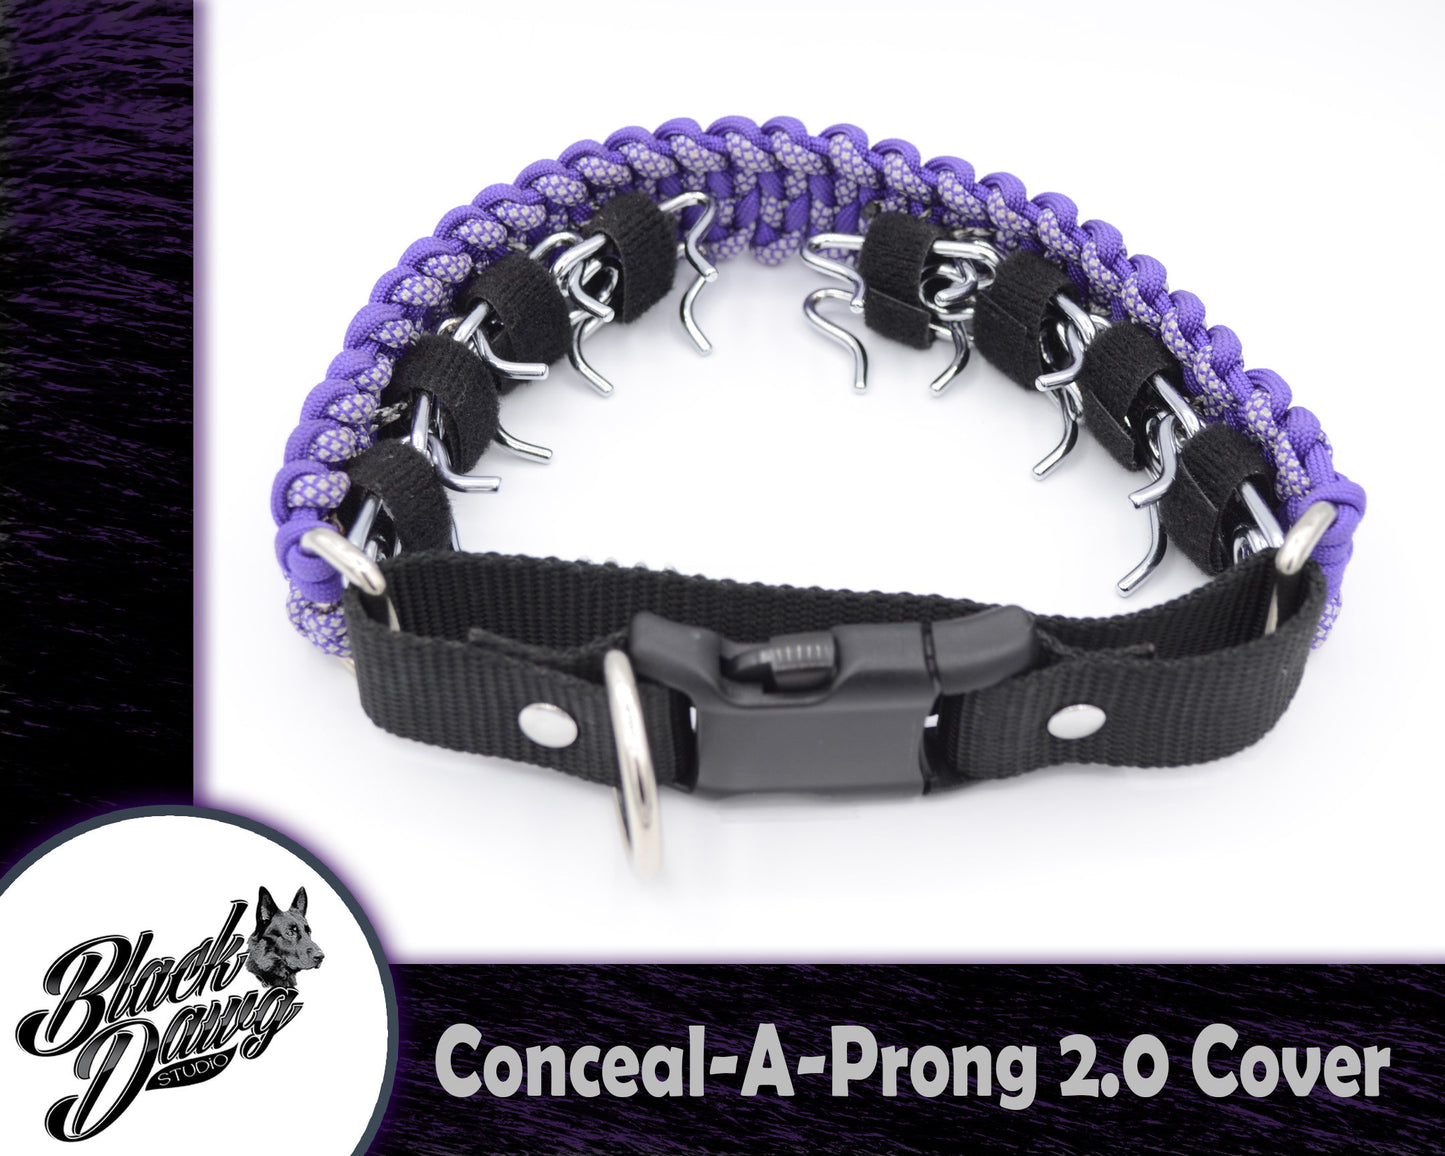 Conceal-A-Prong 2.0 - Paracord Prong Collar Cover - 7 Links in Plasma and Purple